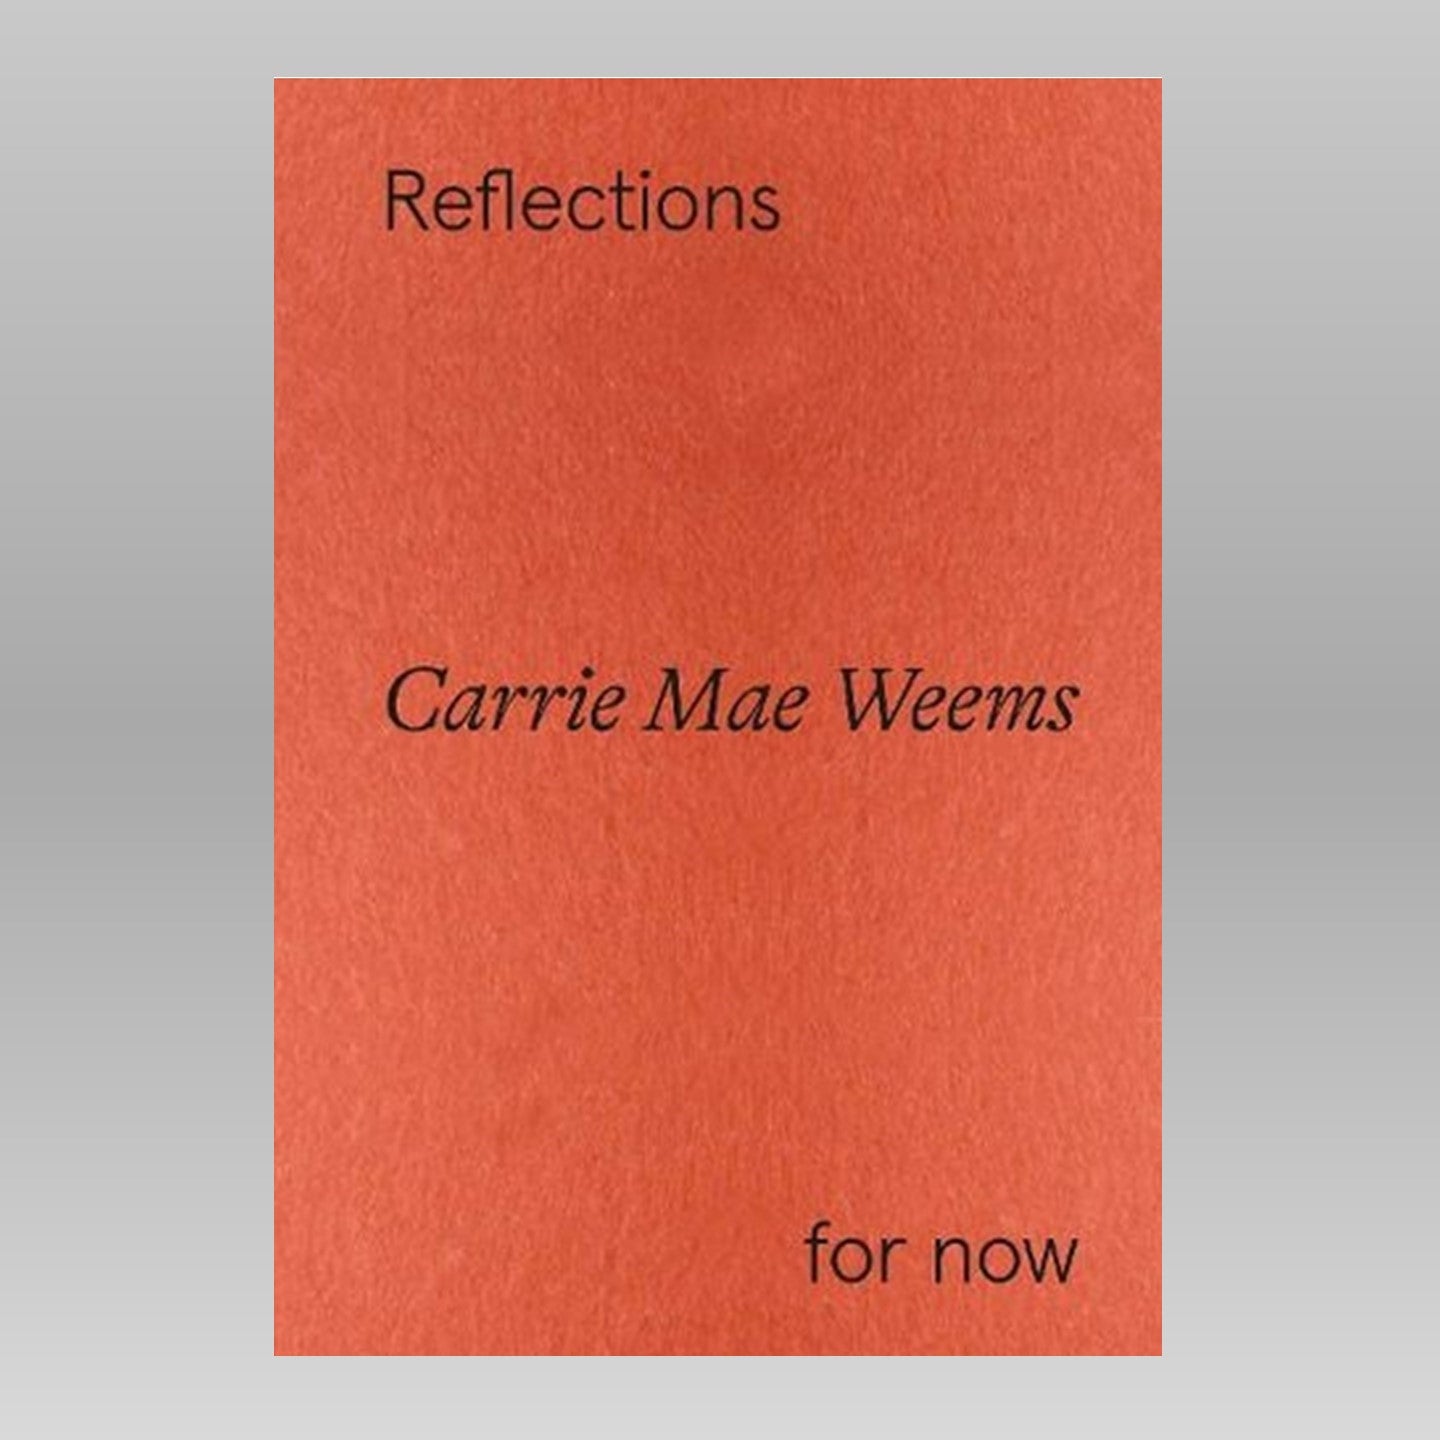 Carrie Mae Weems: Reflections for Now Exhibition Catalogue